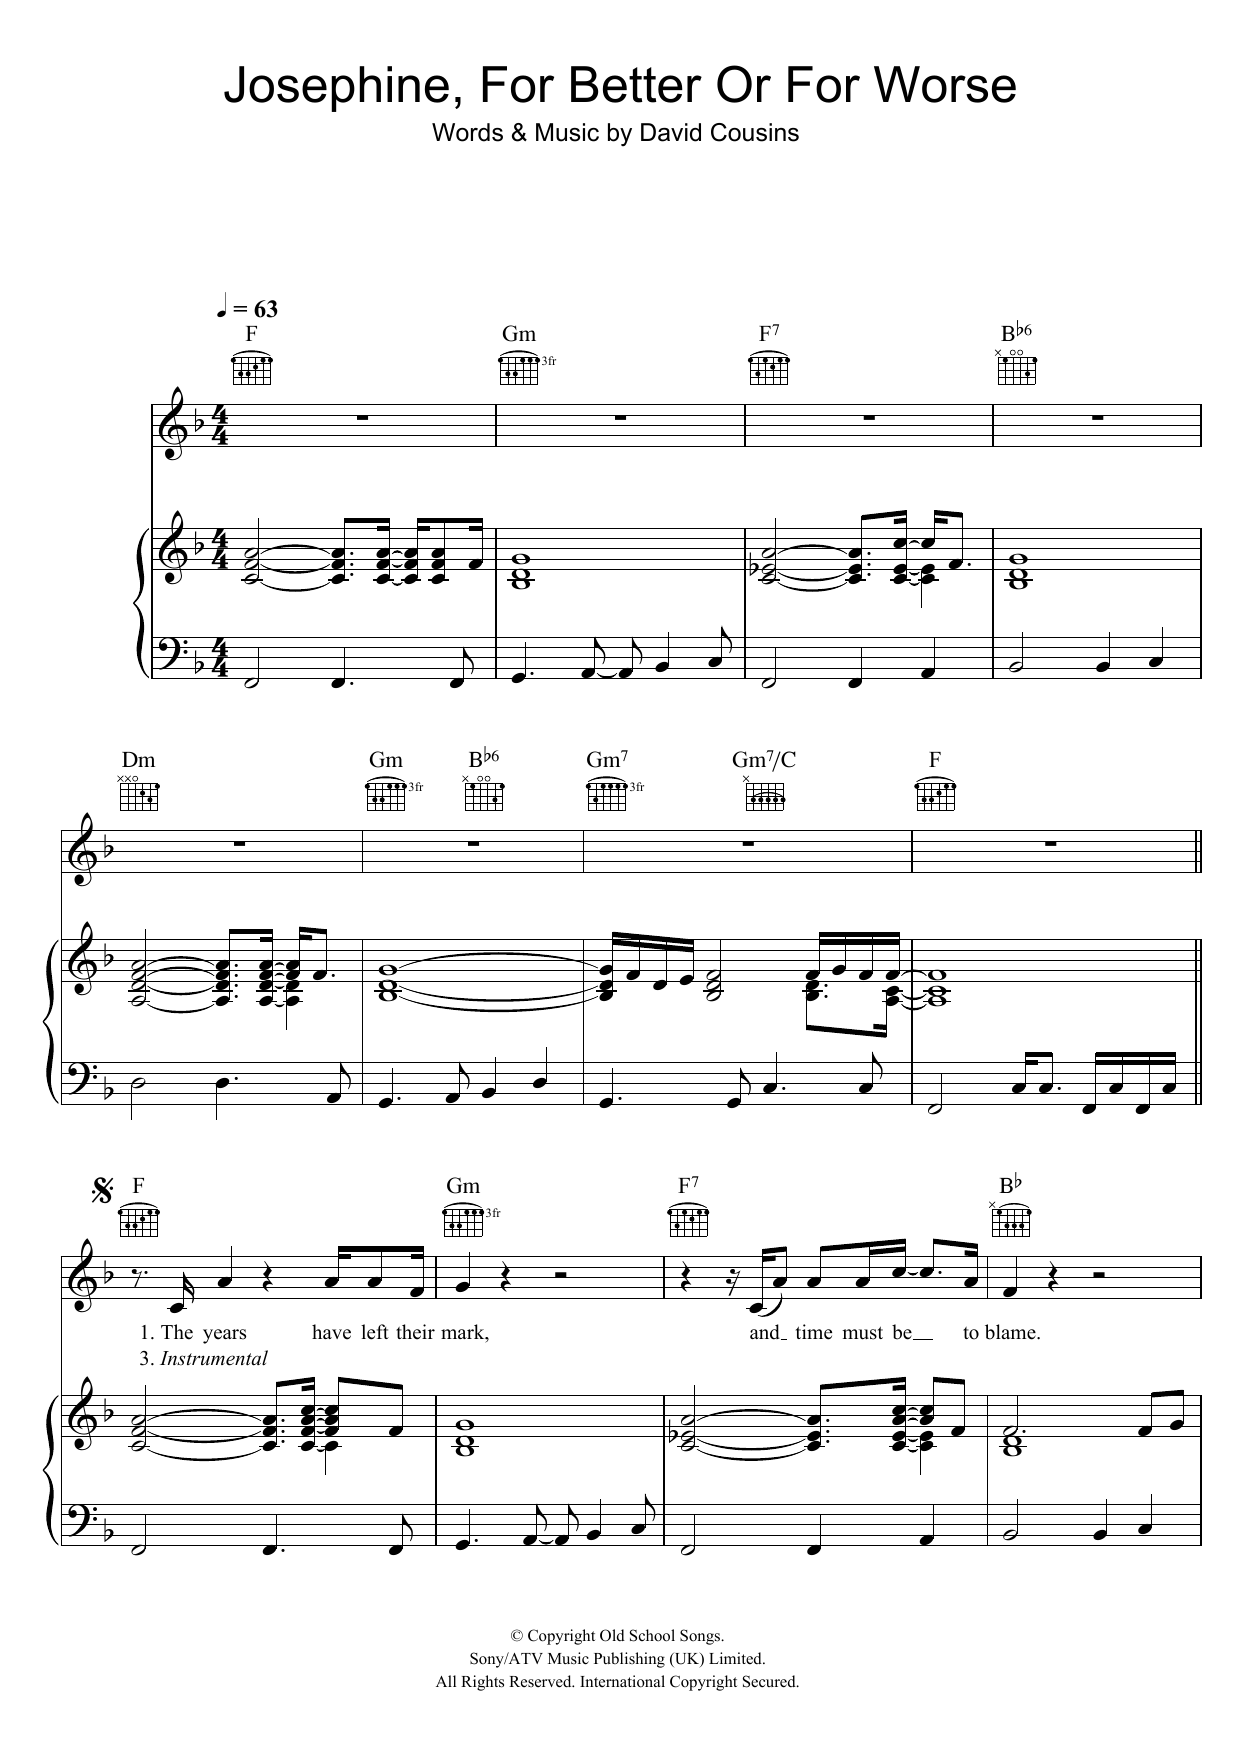 Download The Strawbs Josephine, For Better Or For Worse Sheet Music